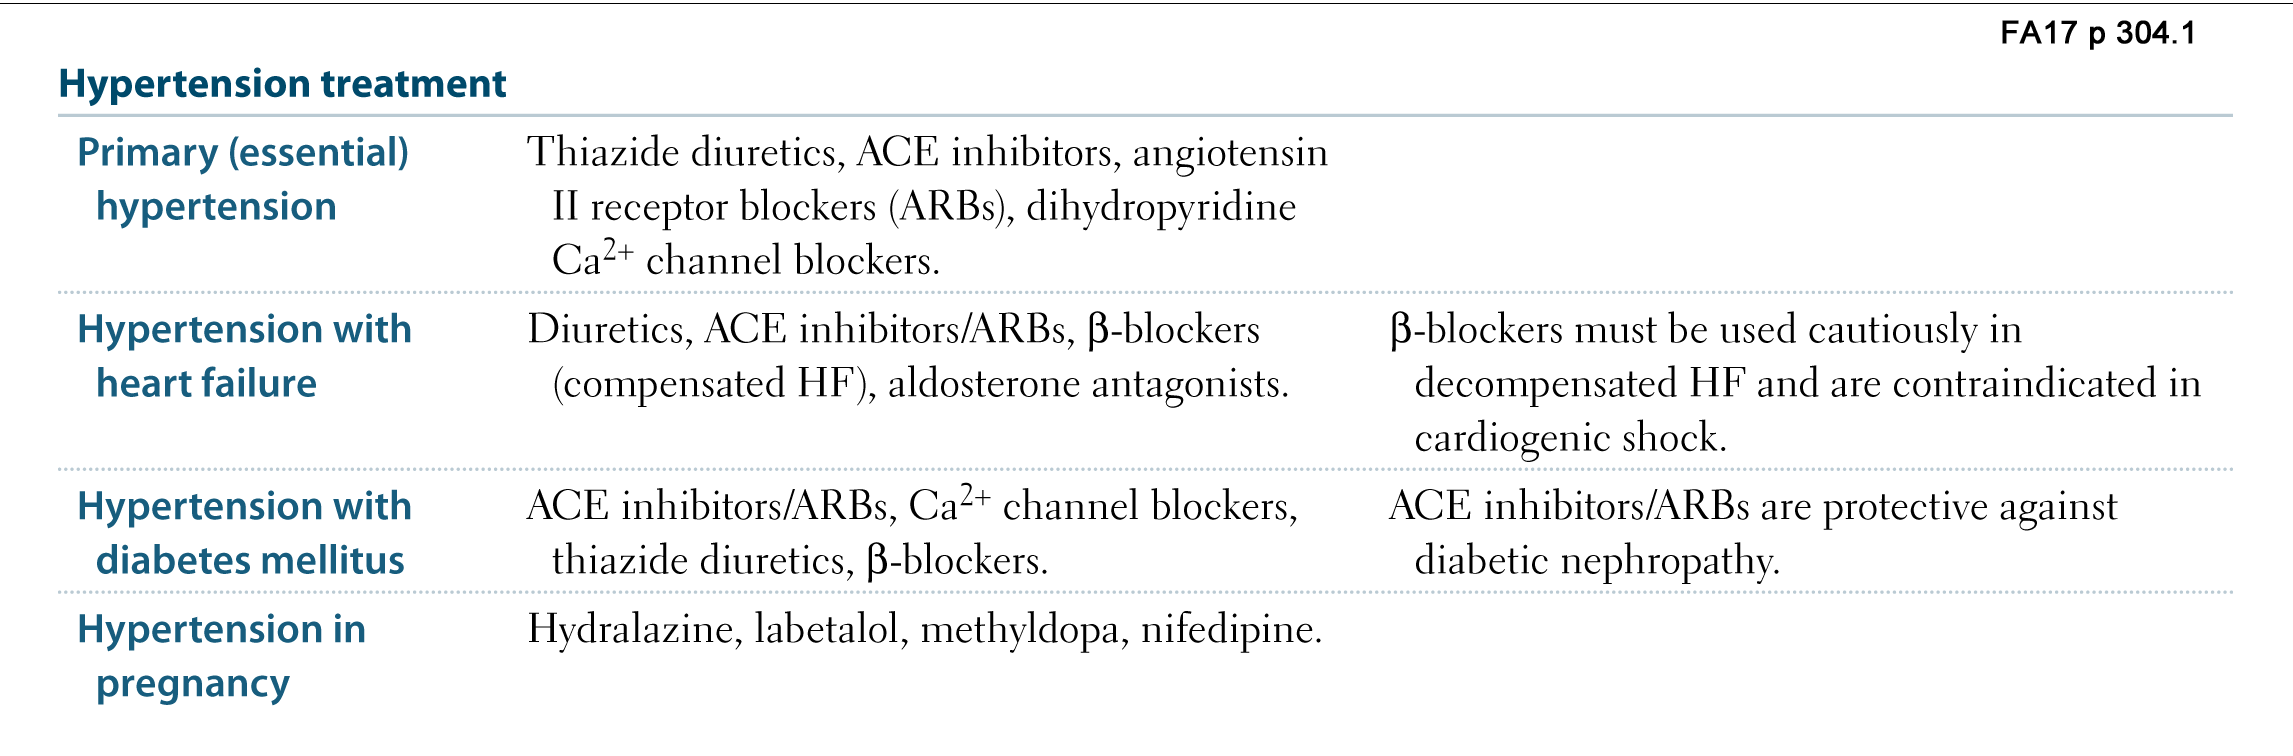 why are diuretics used with ace inhibitors